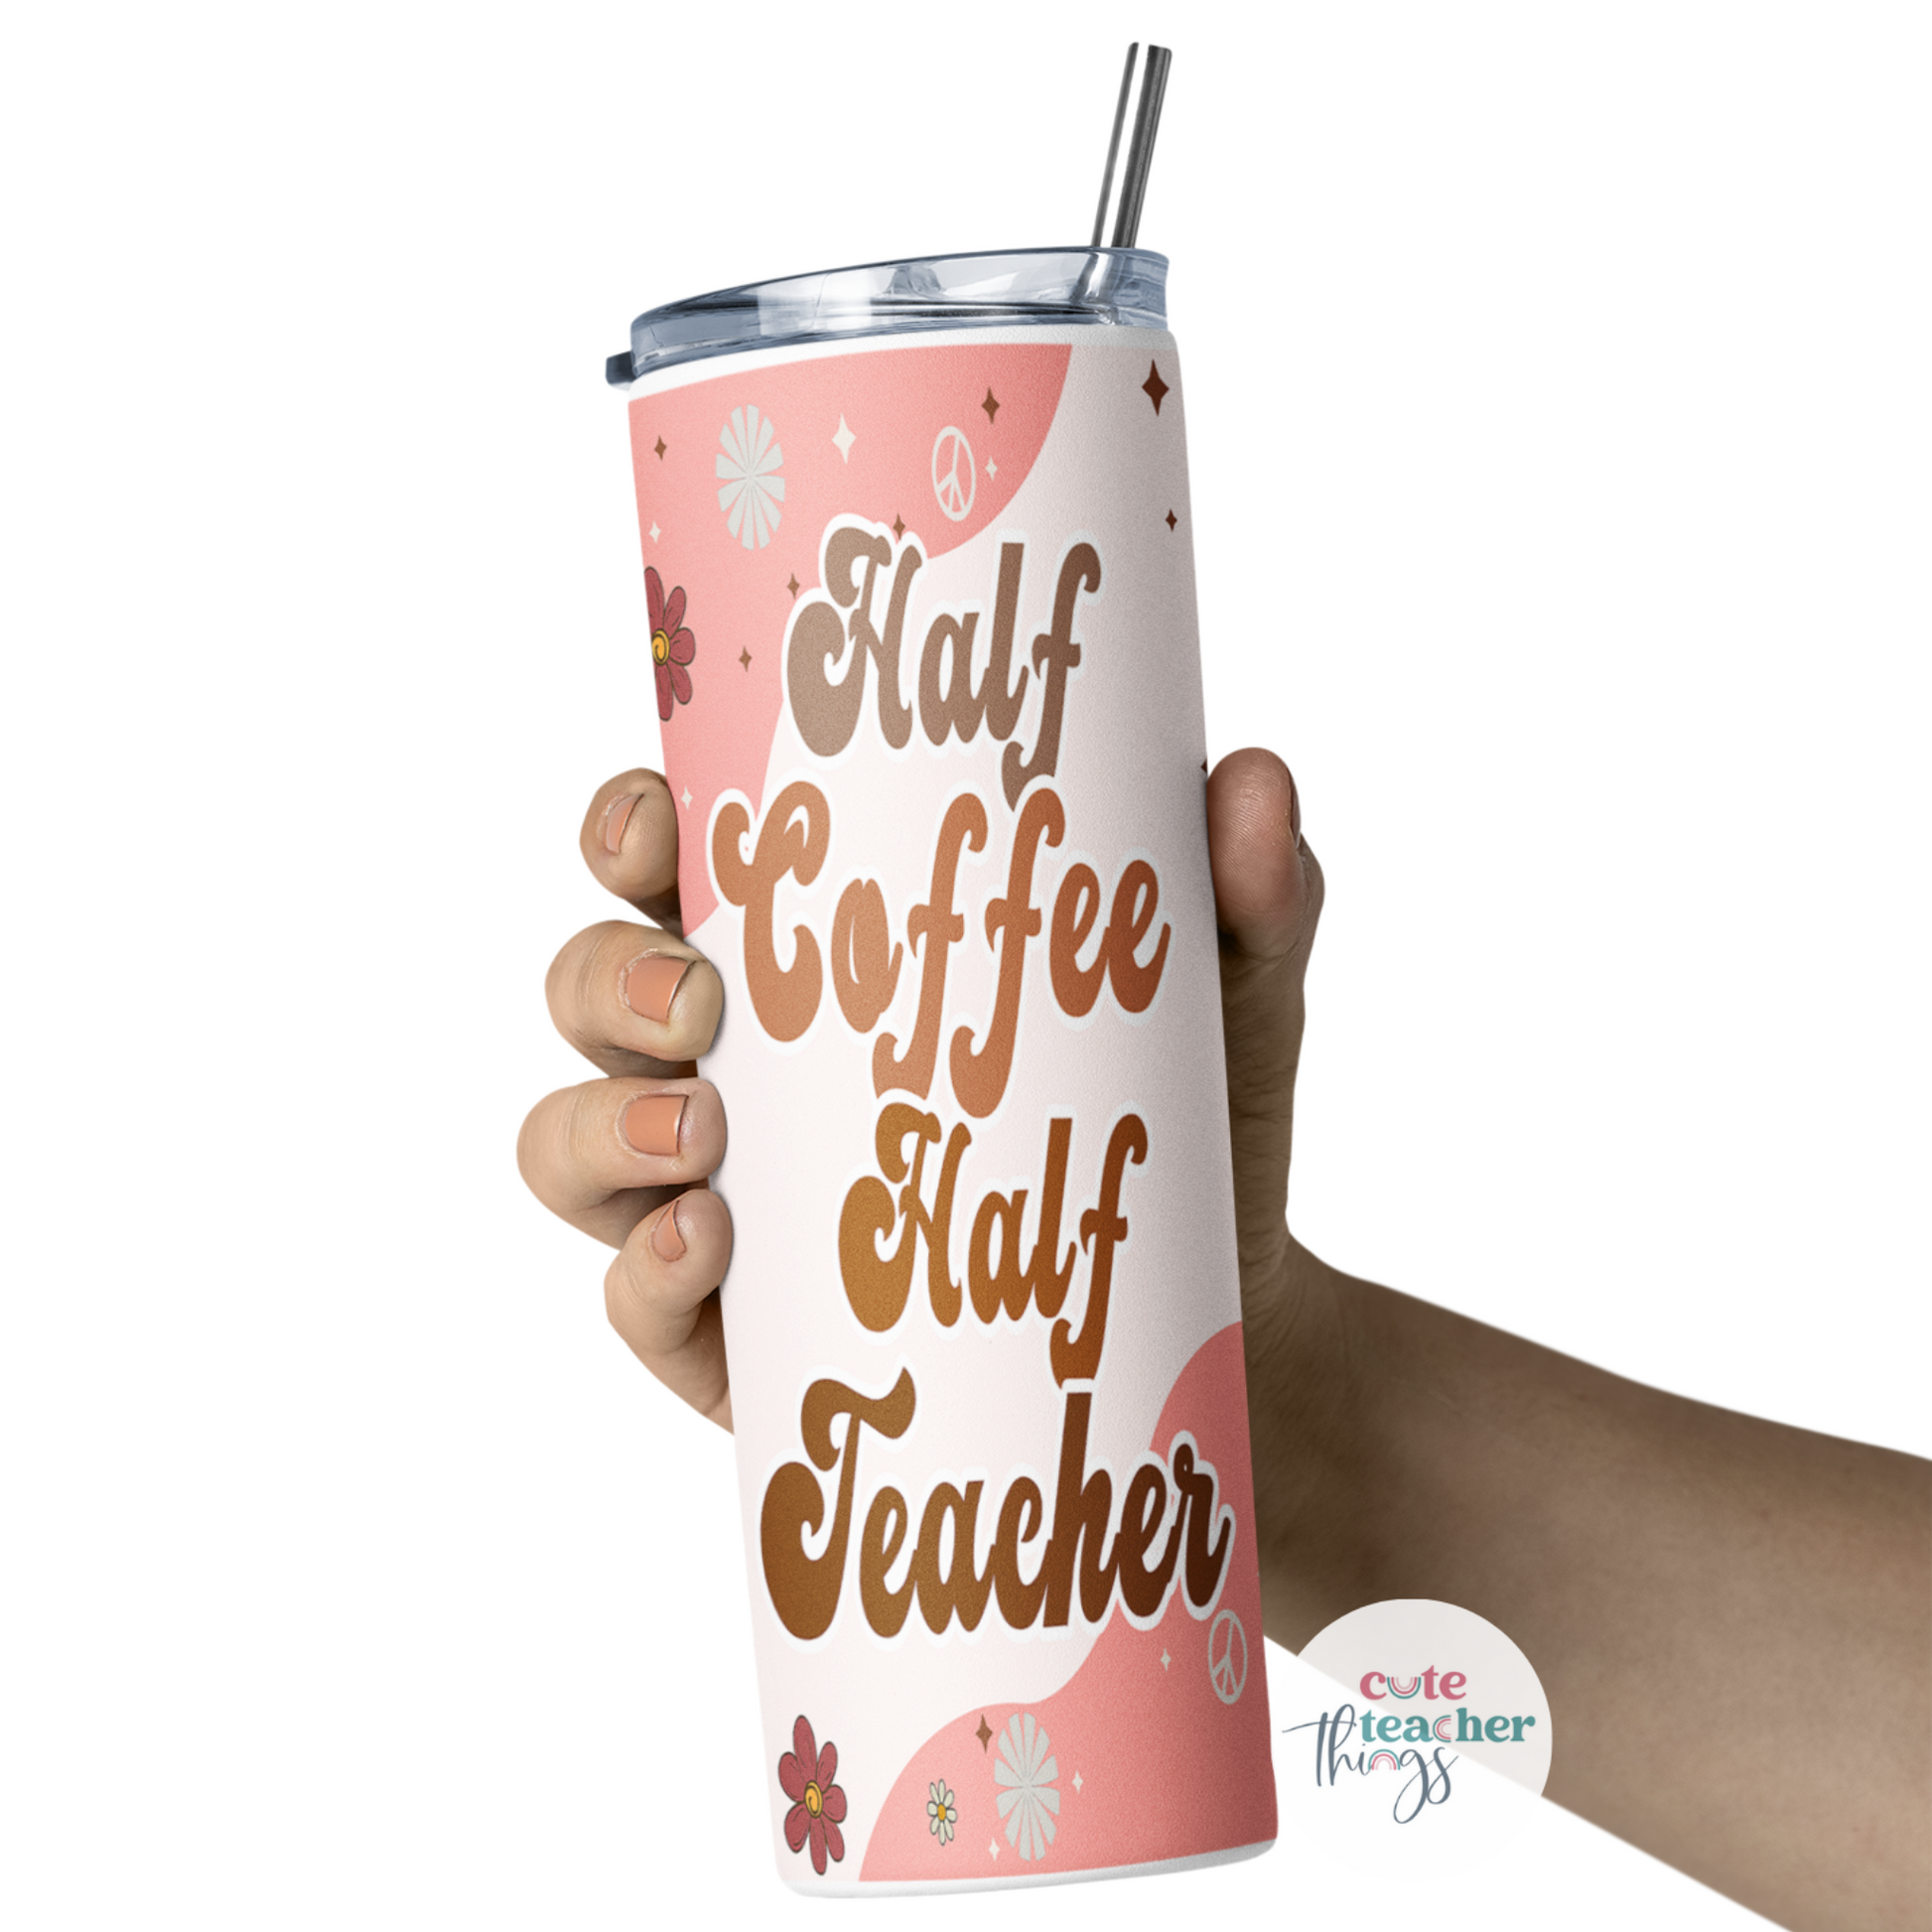 double wall insulated, skinny, coffee lover teacher